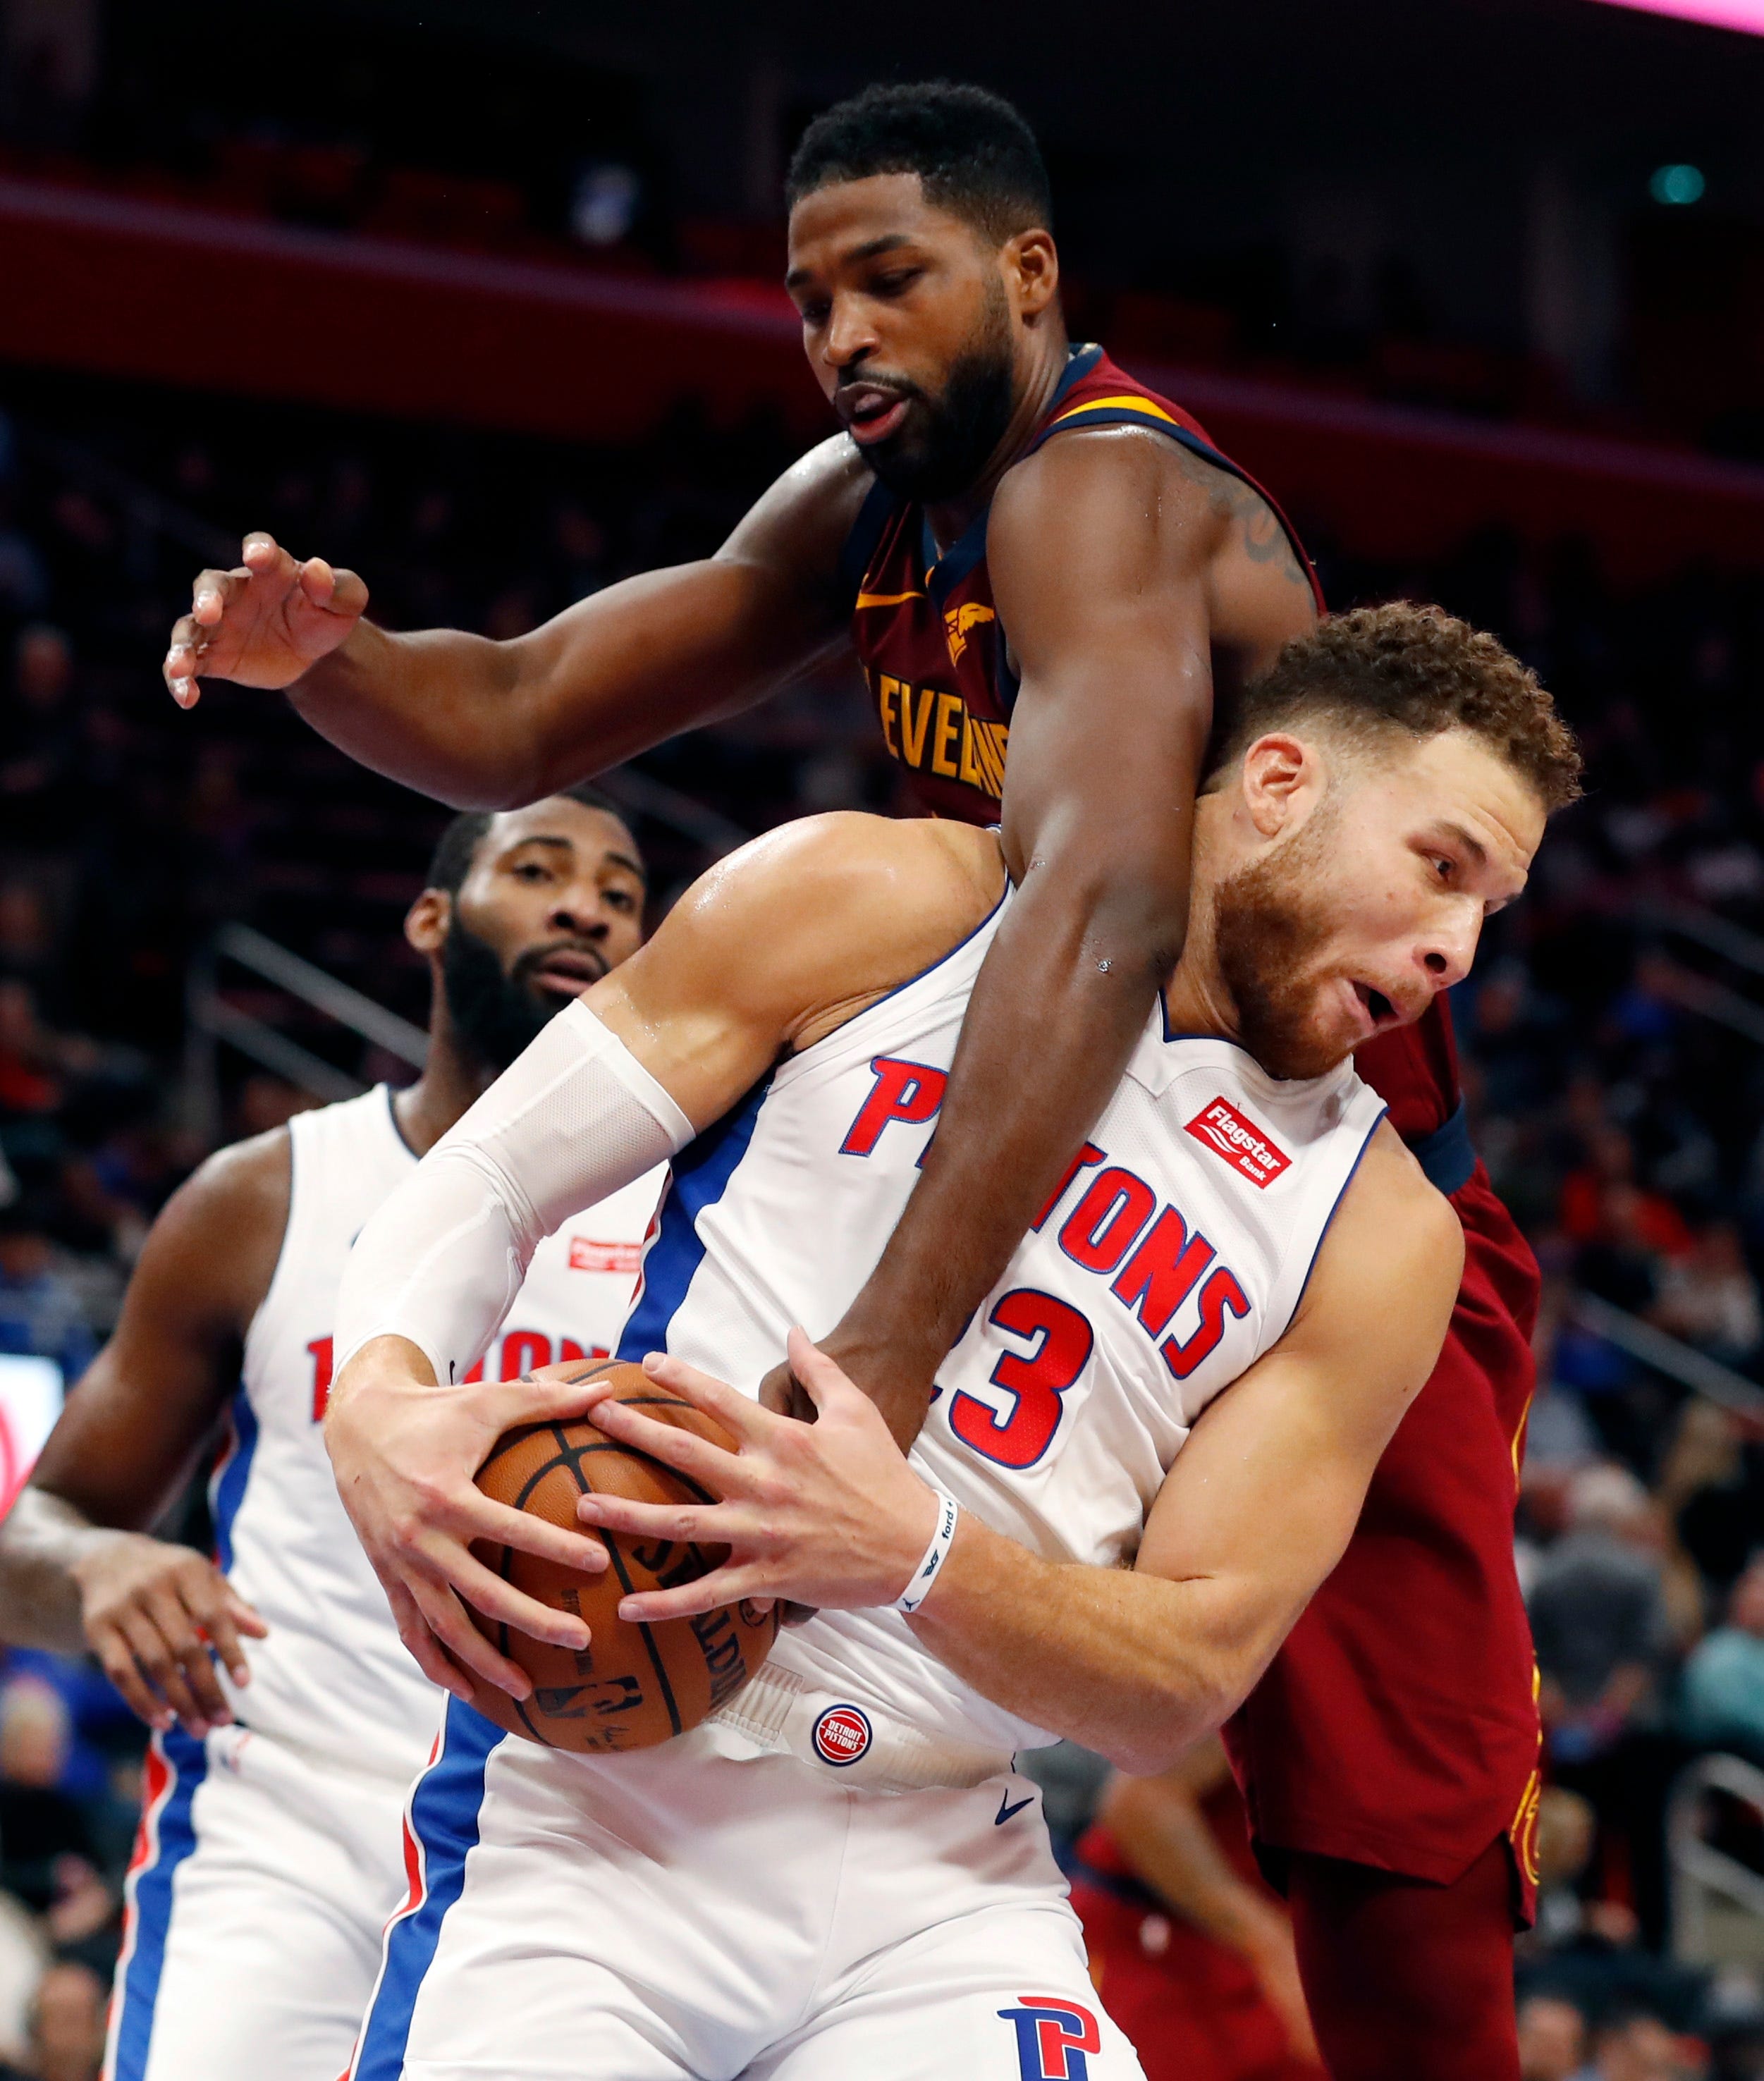 Cleveland Cavaliers center Tristan Thompson reaches in on Detroit Pistons forward Blake Griffin (23) during the second half of an NBA basketball game, Thursday, Oct. 25, 2018, in Detroit. Detroit went on to win 110-103 over Cleveland.